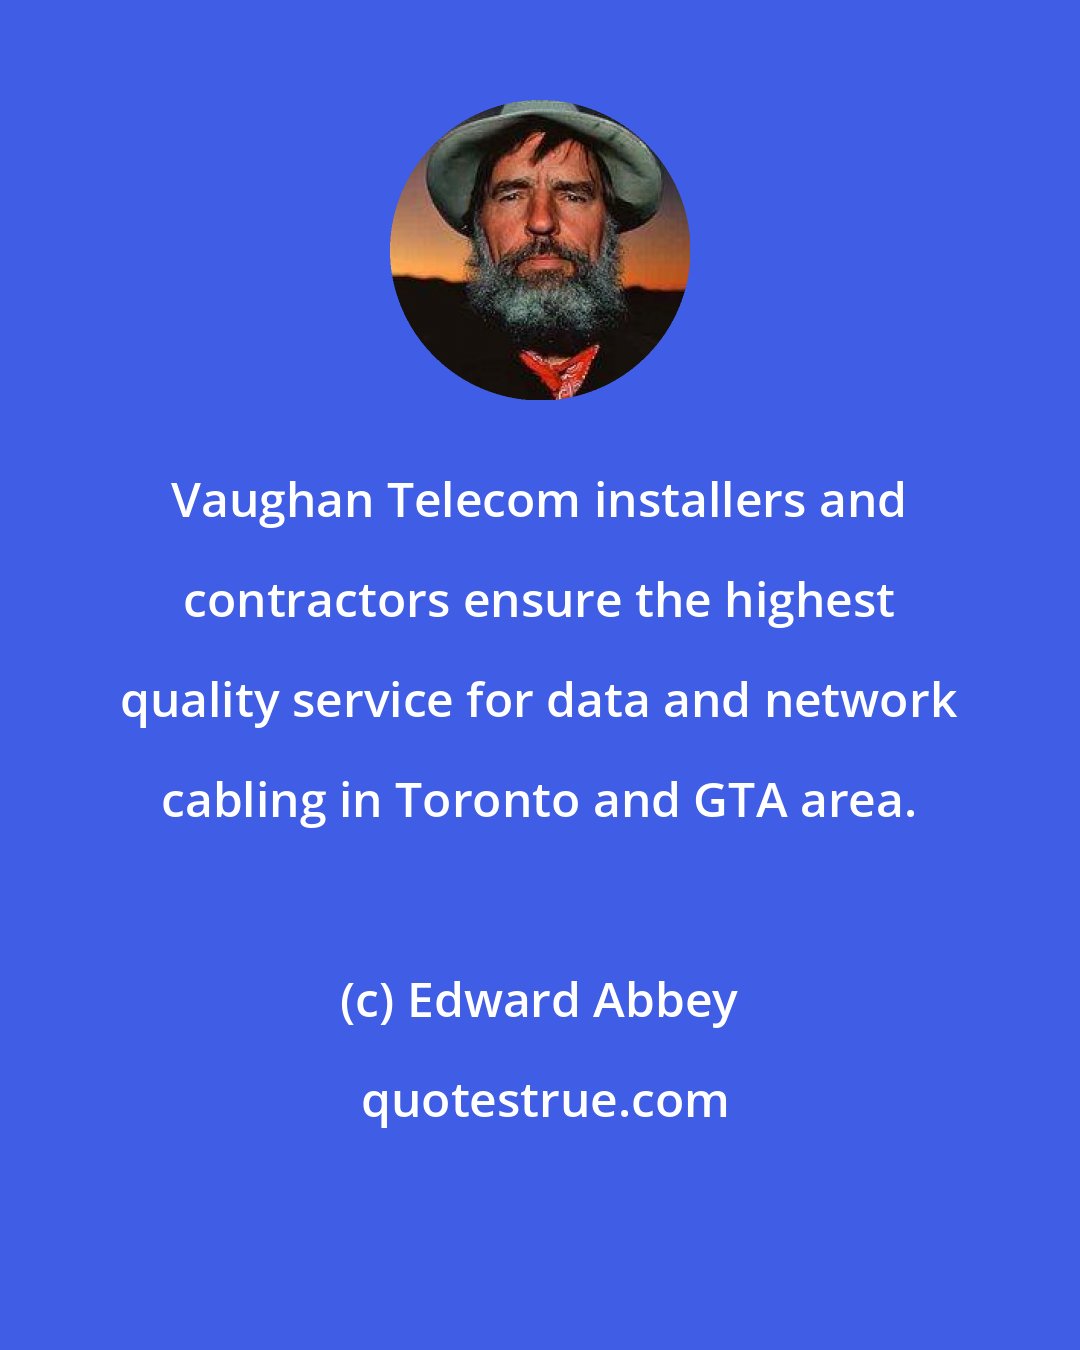 Edward Abbey: Vaughan Telecom installers and contractors ensure the highest quality service for data and network cabling in Toronto and GTA area.